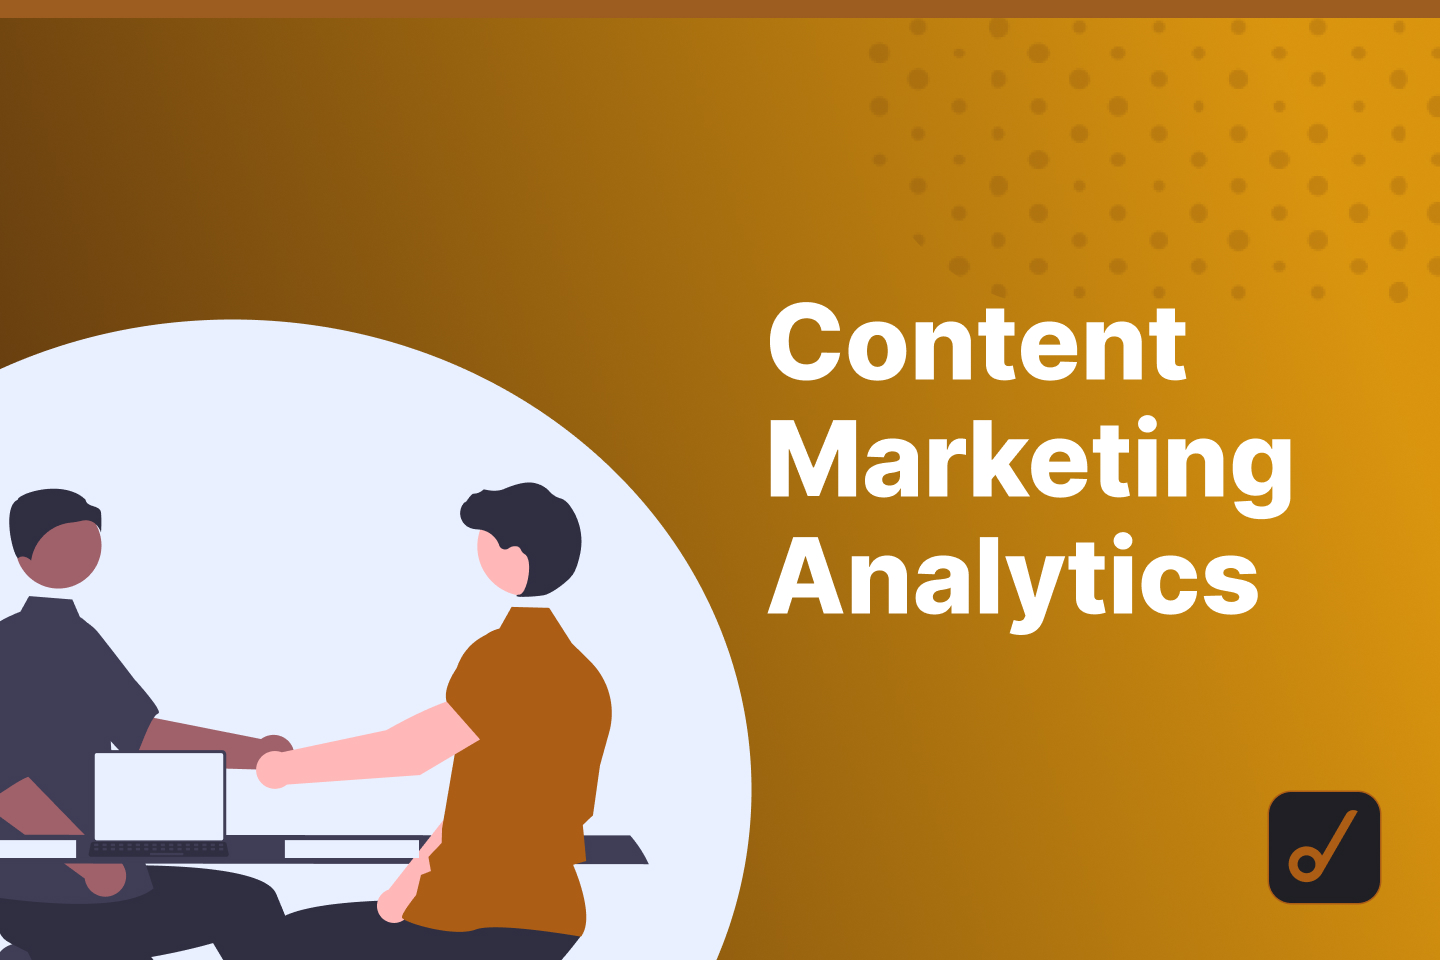 Content Analytics: Top Questions, Tools, and Metrics